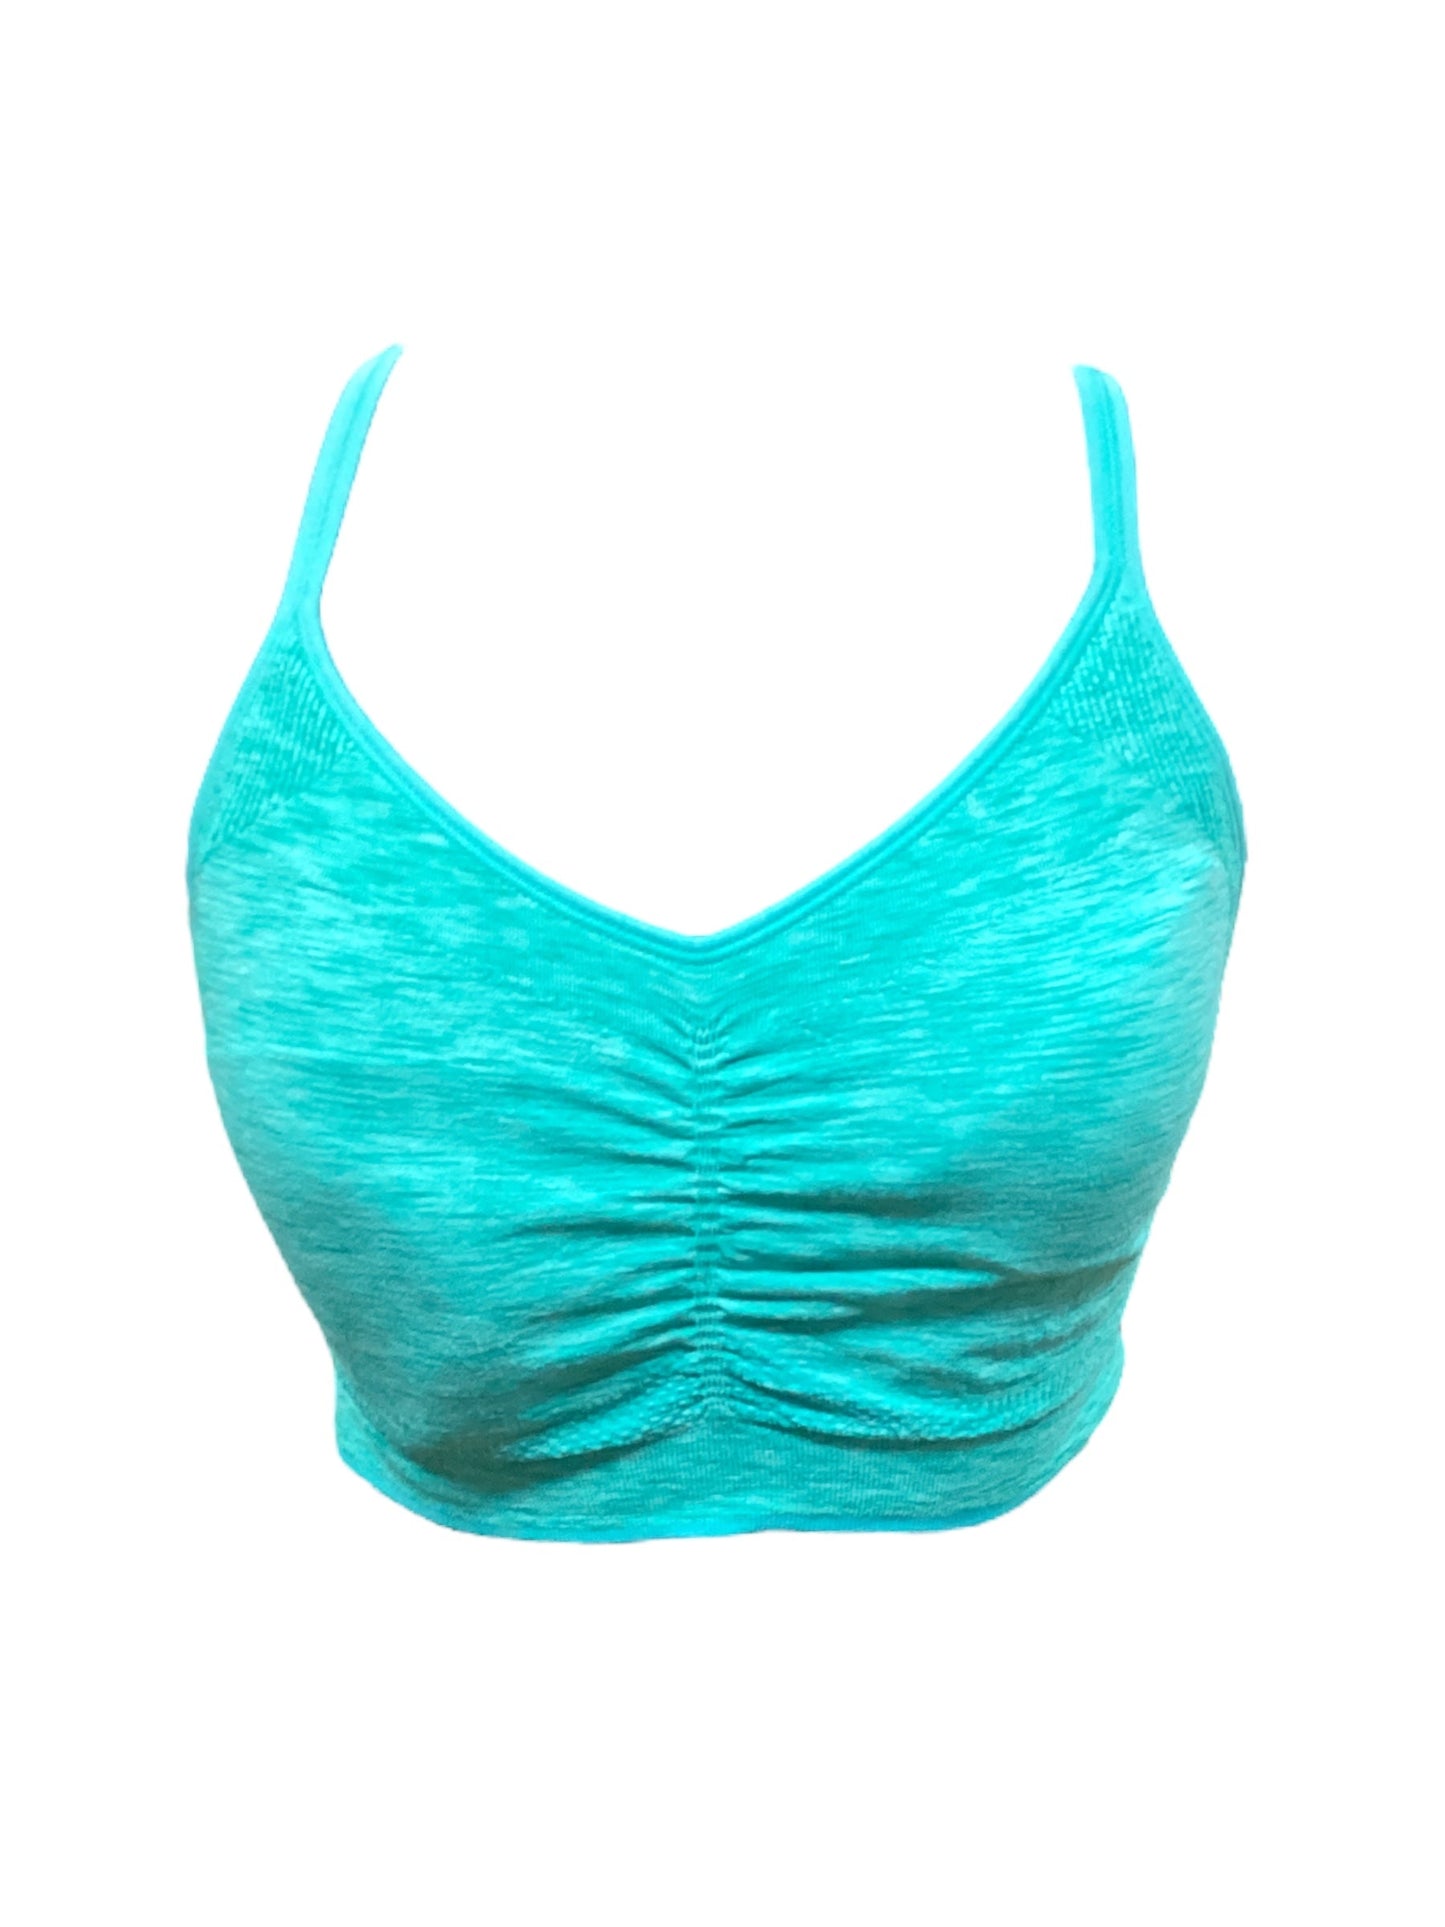 Athletic Bra By Old Navy  Size: L